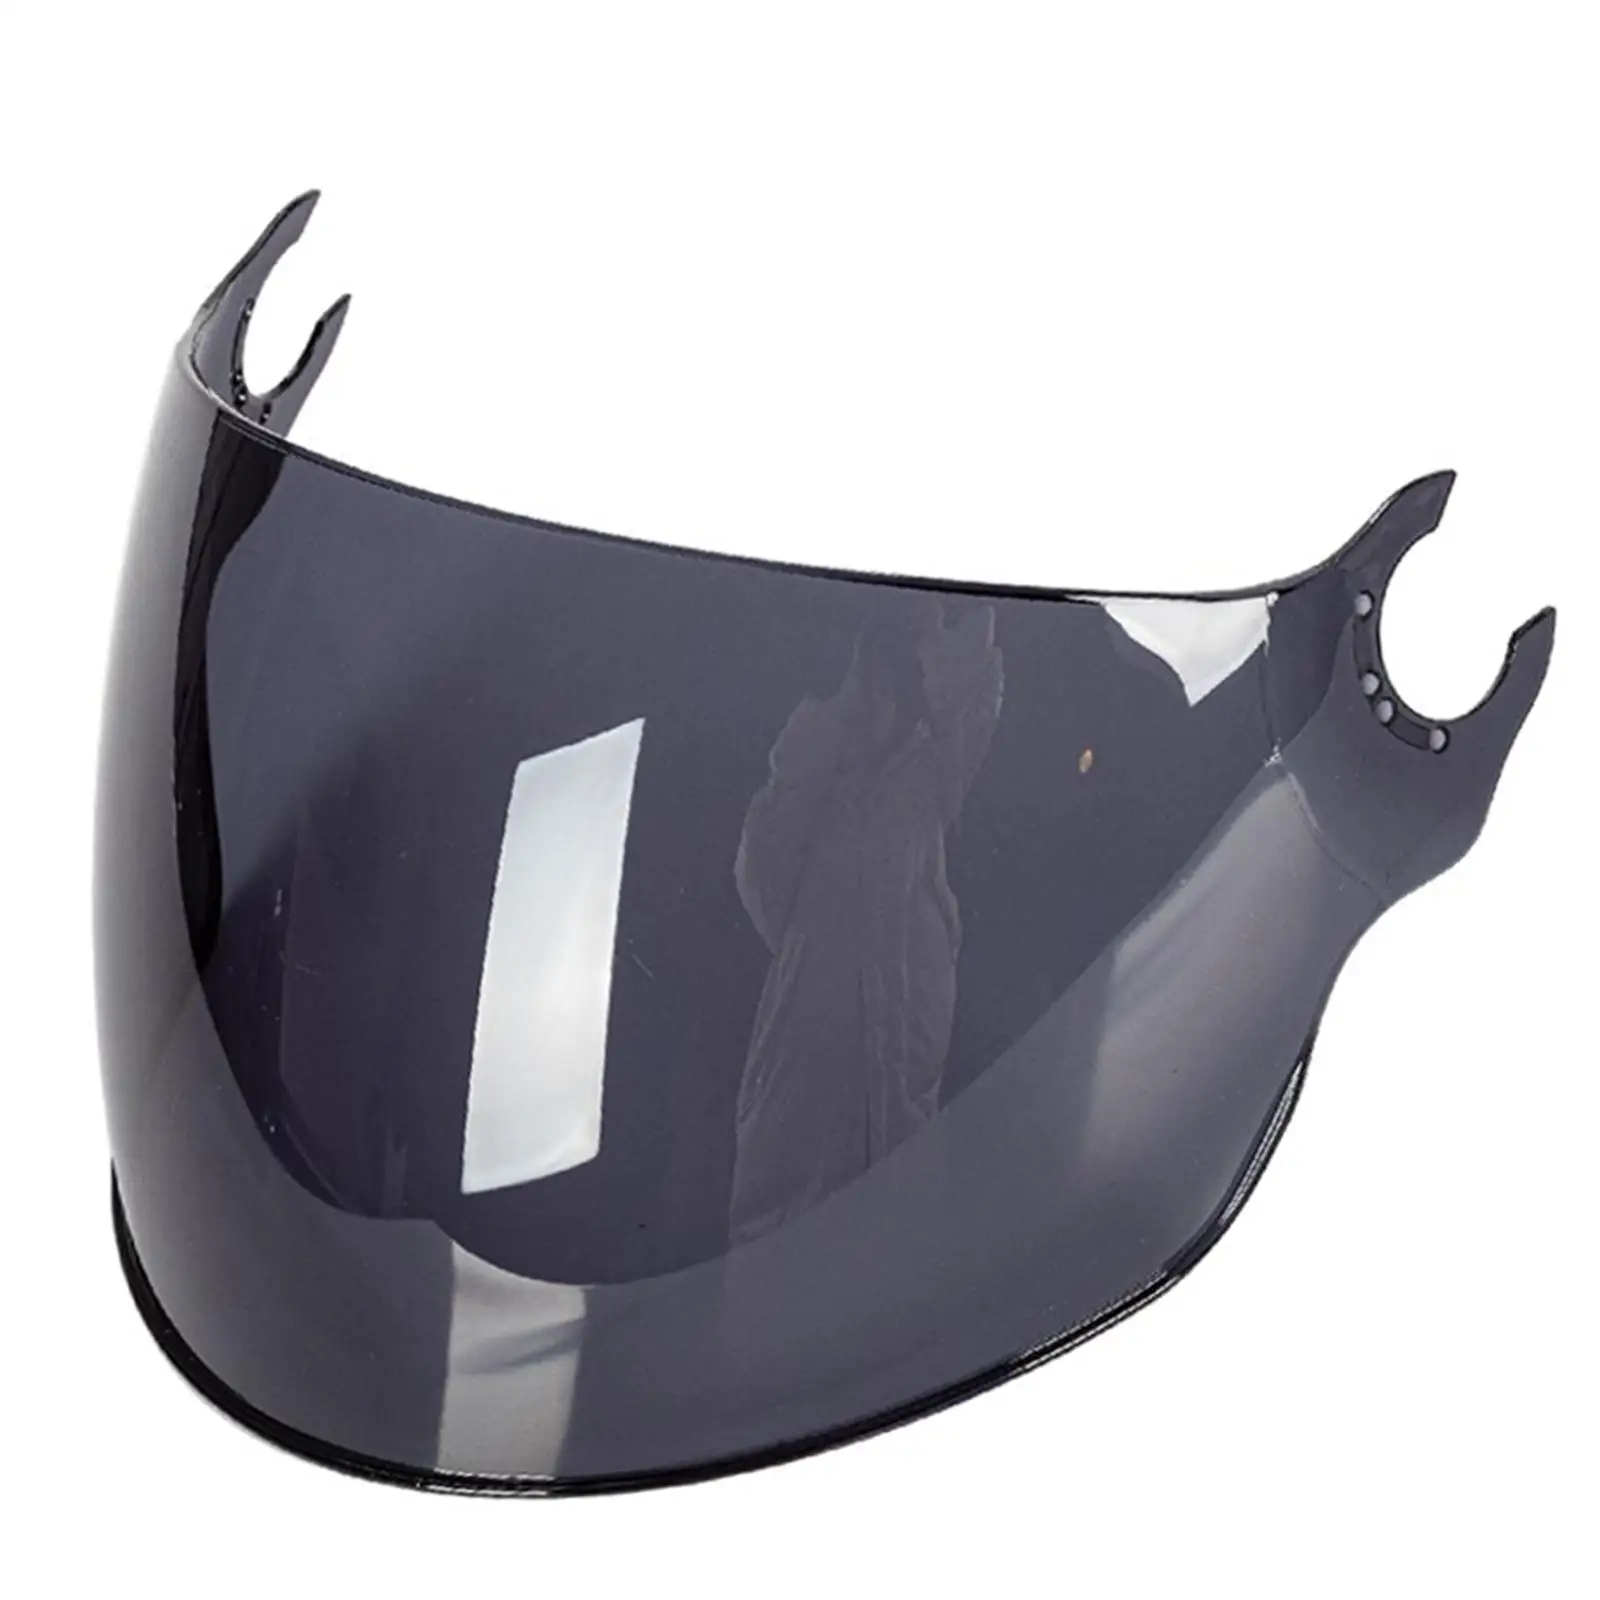 Visor Flip up Anti-Scratch for of562 Parts Replace